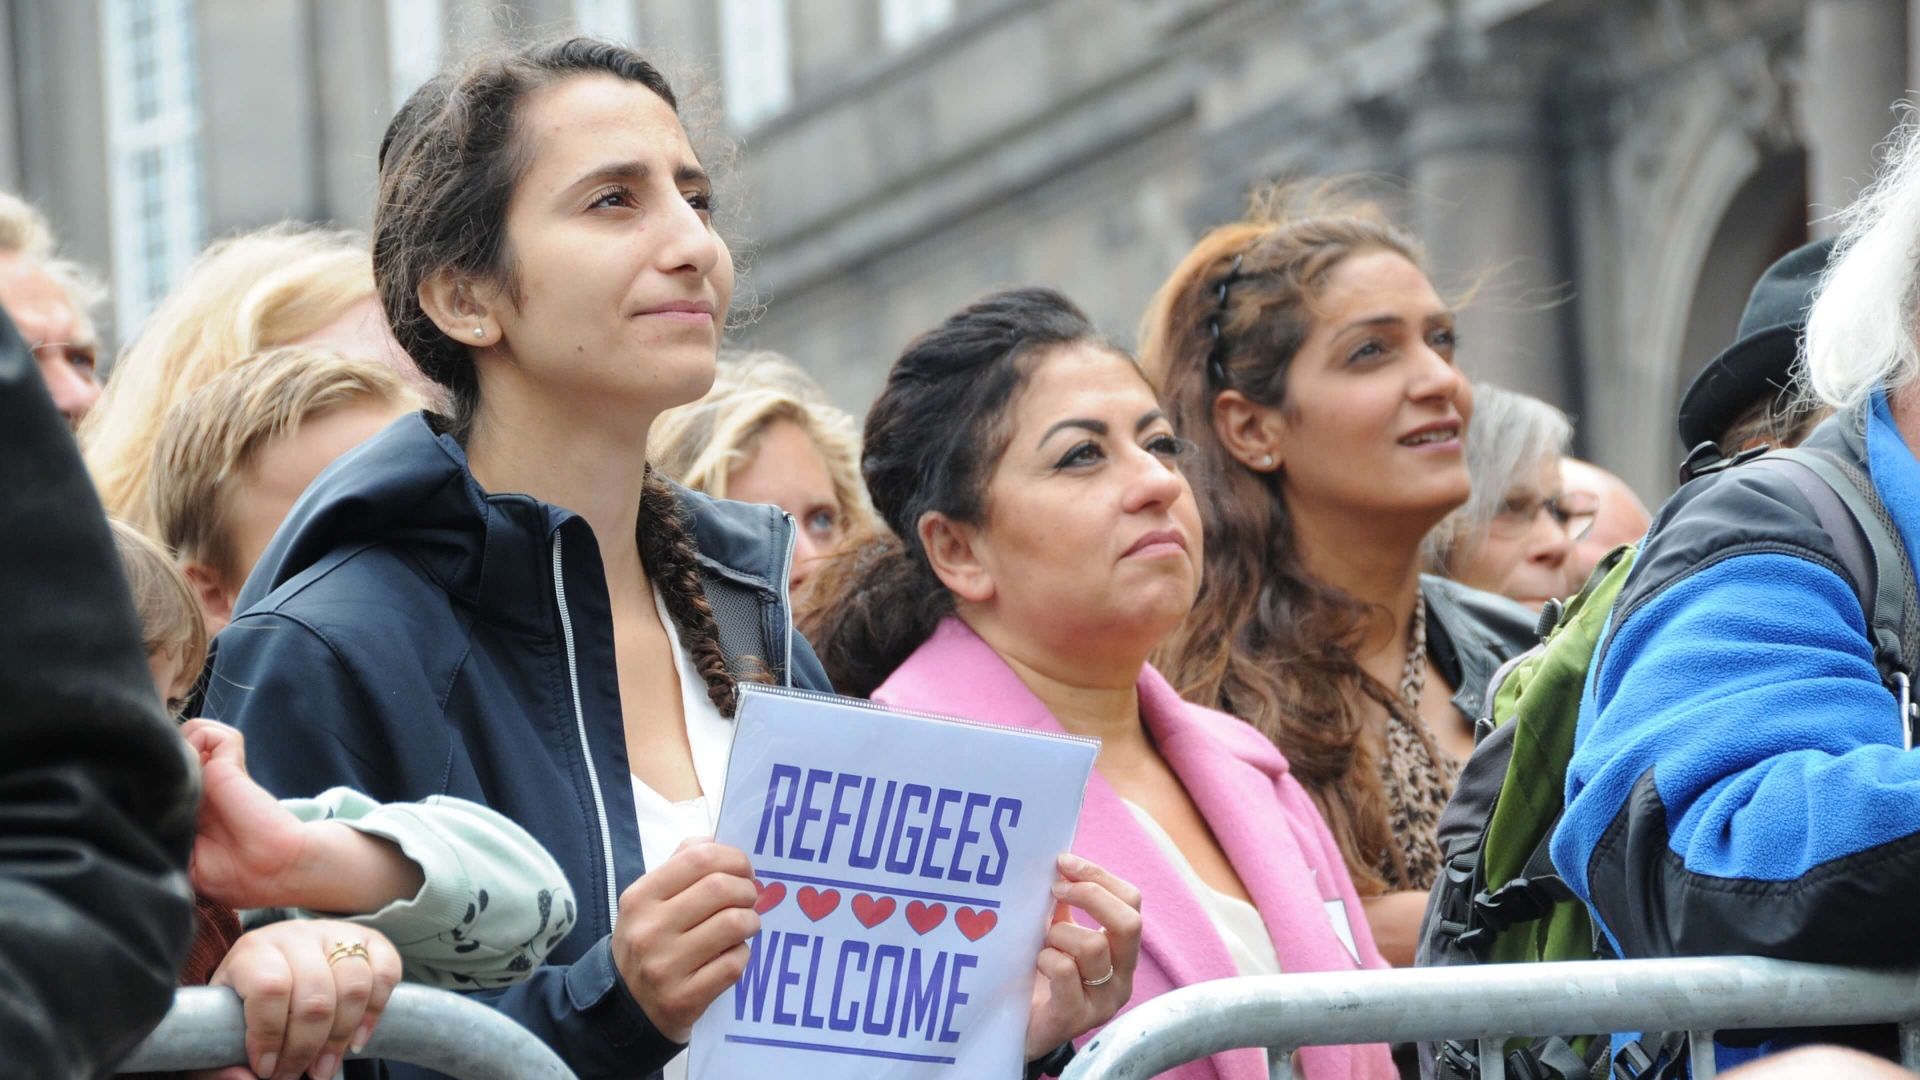 A European migration and refugee policy based on solidarity